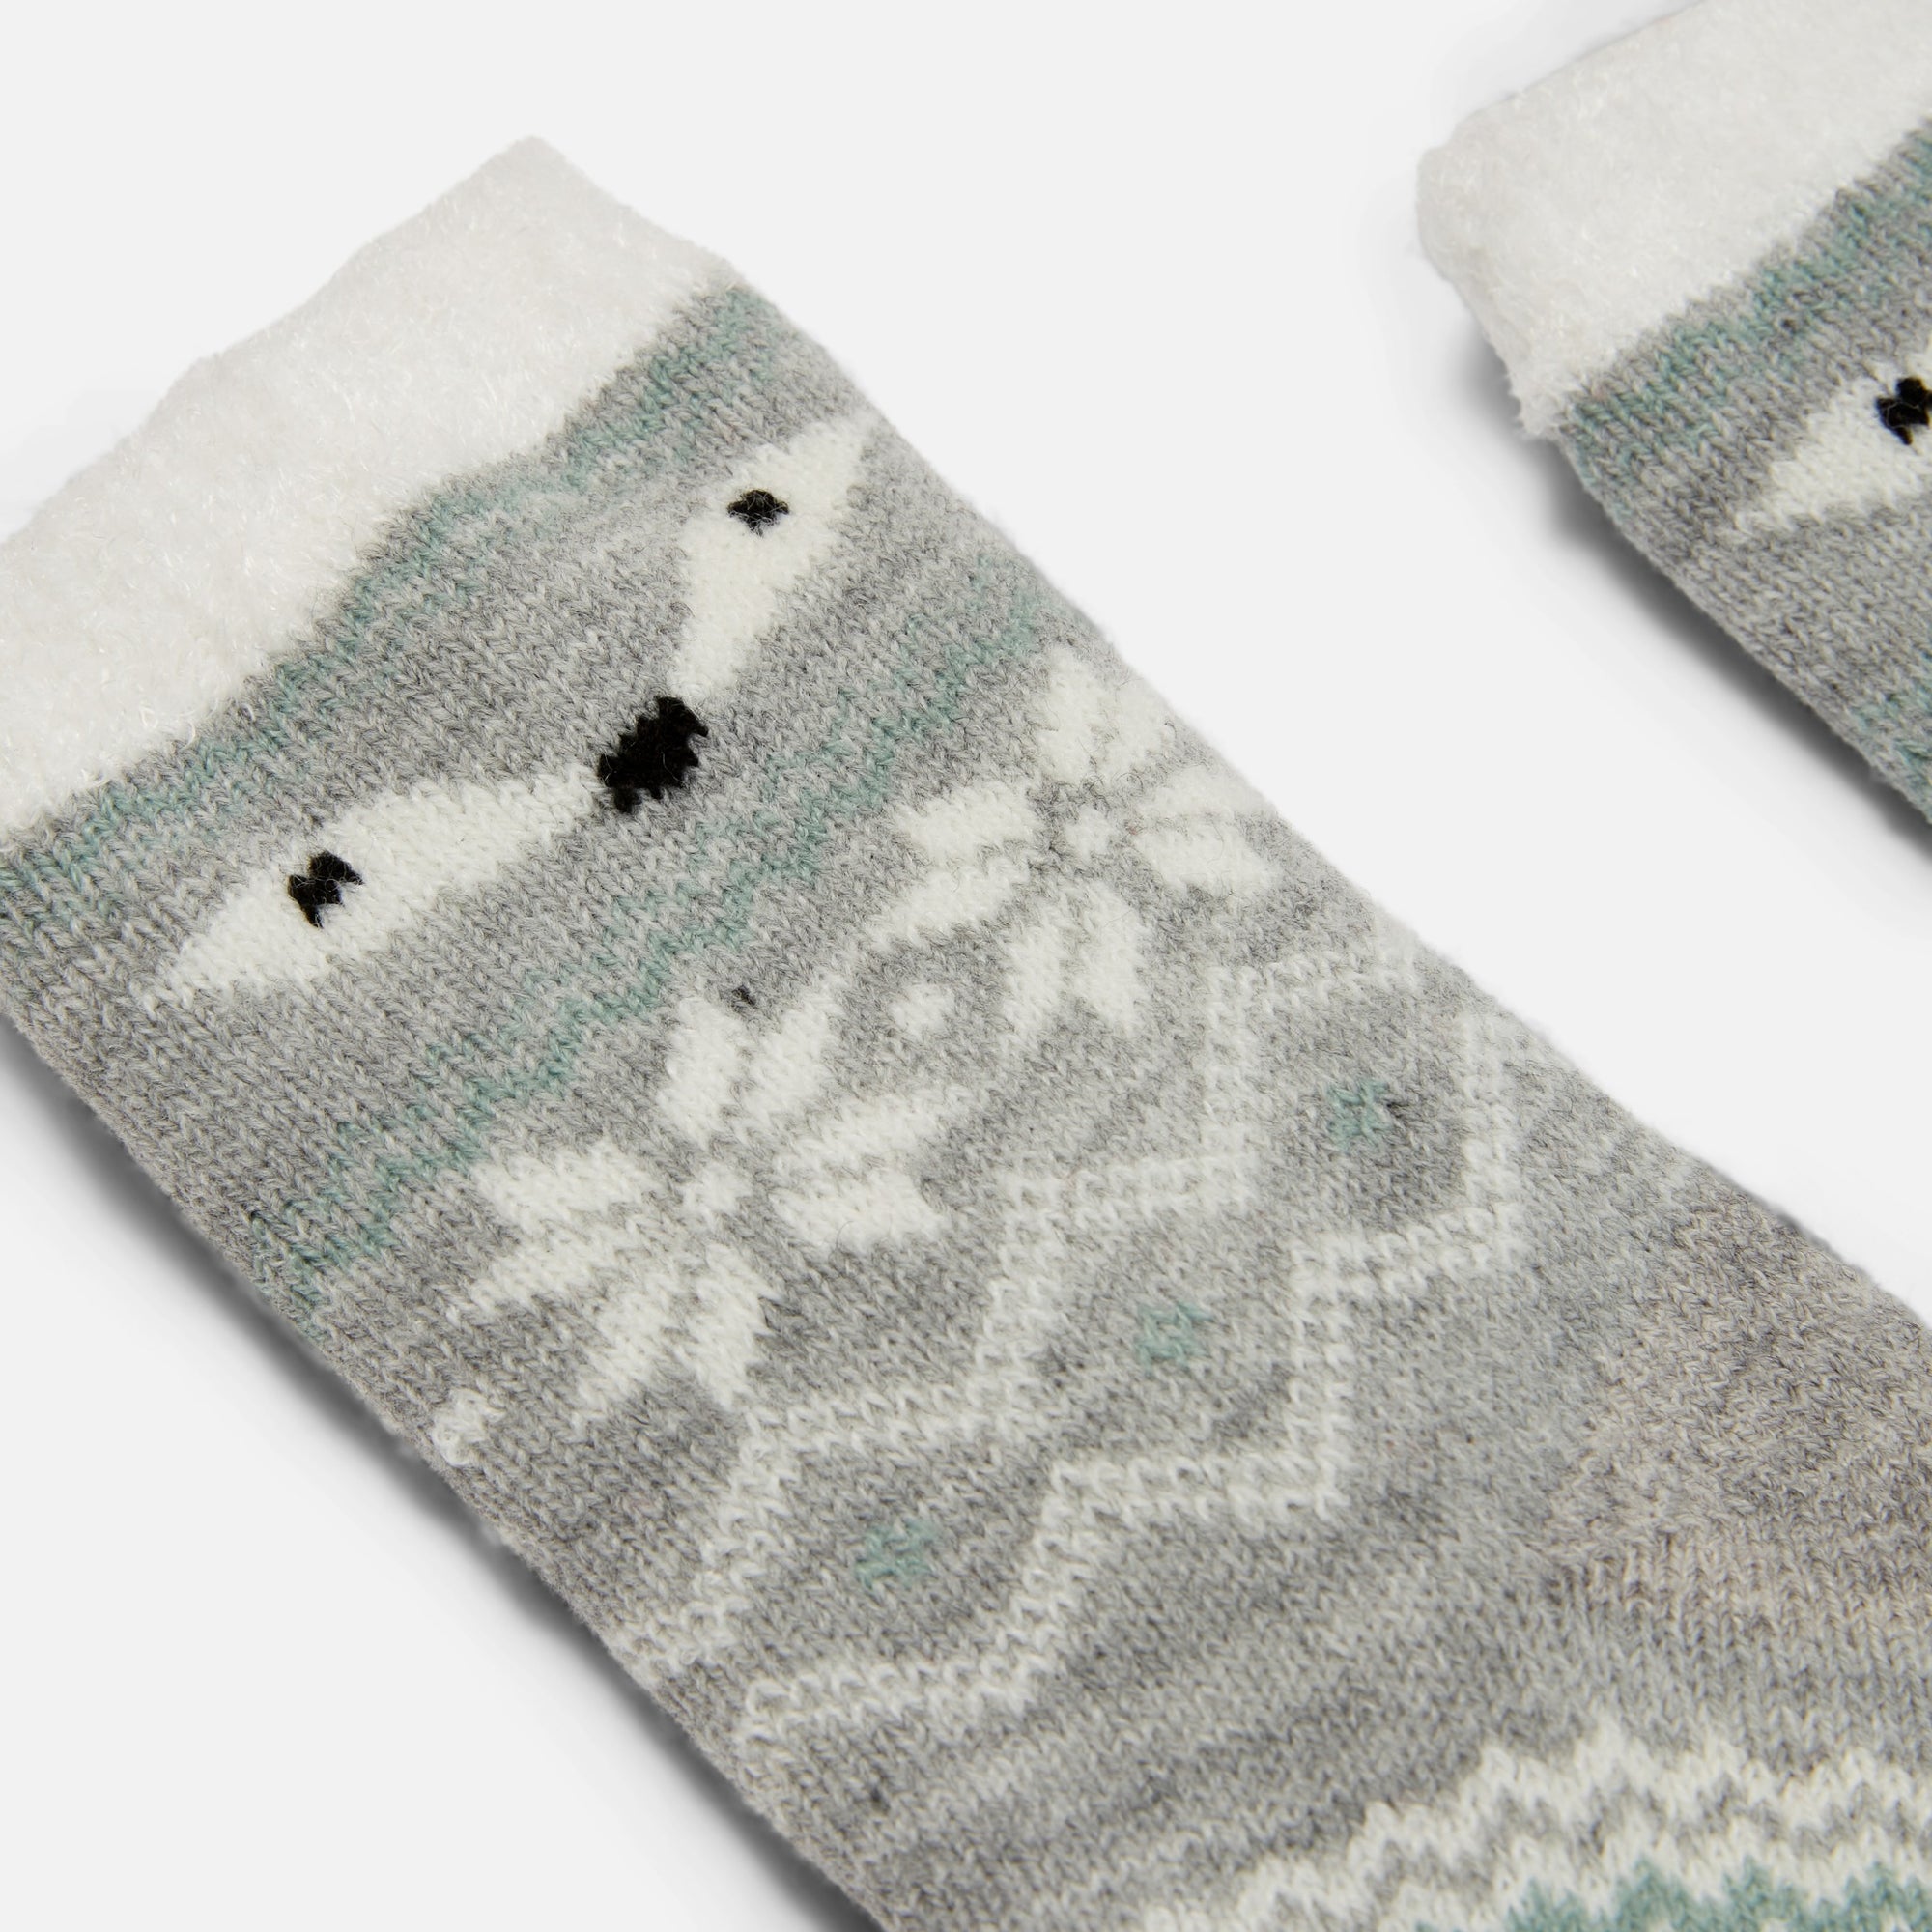 Grey cozy socks with norwegian patterns and fox faces